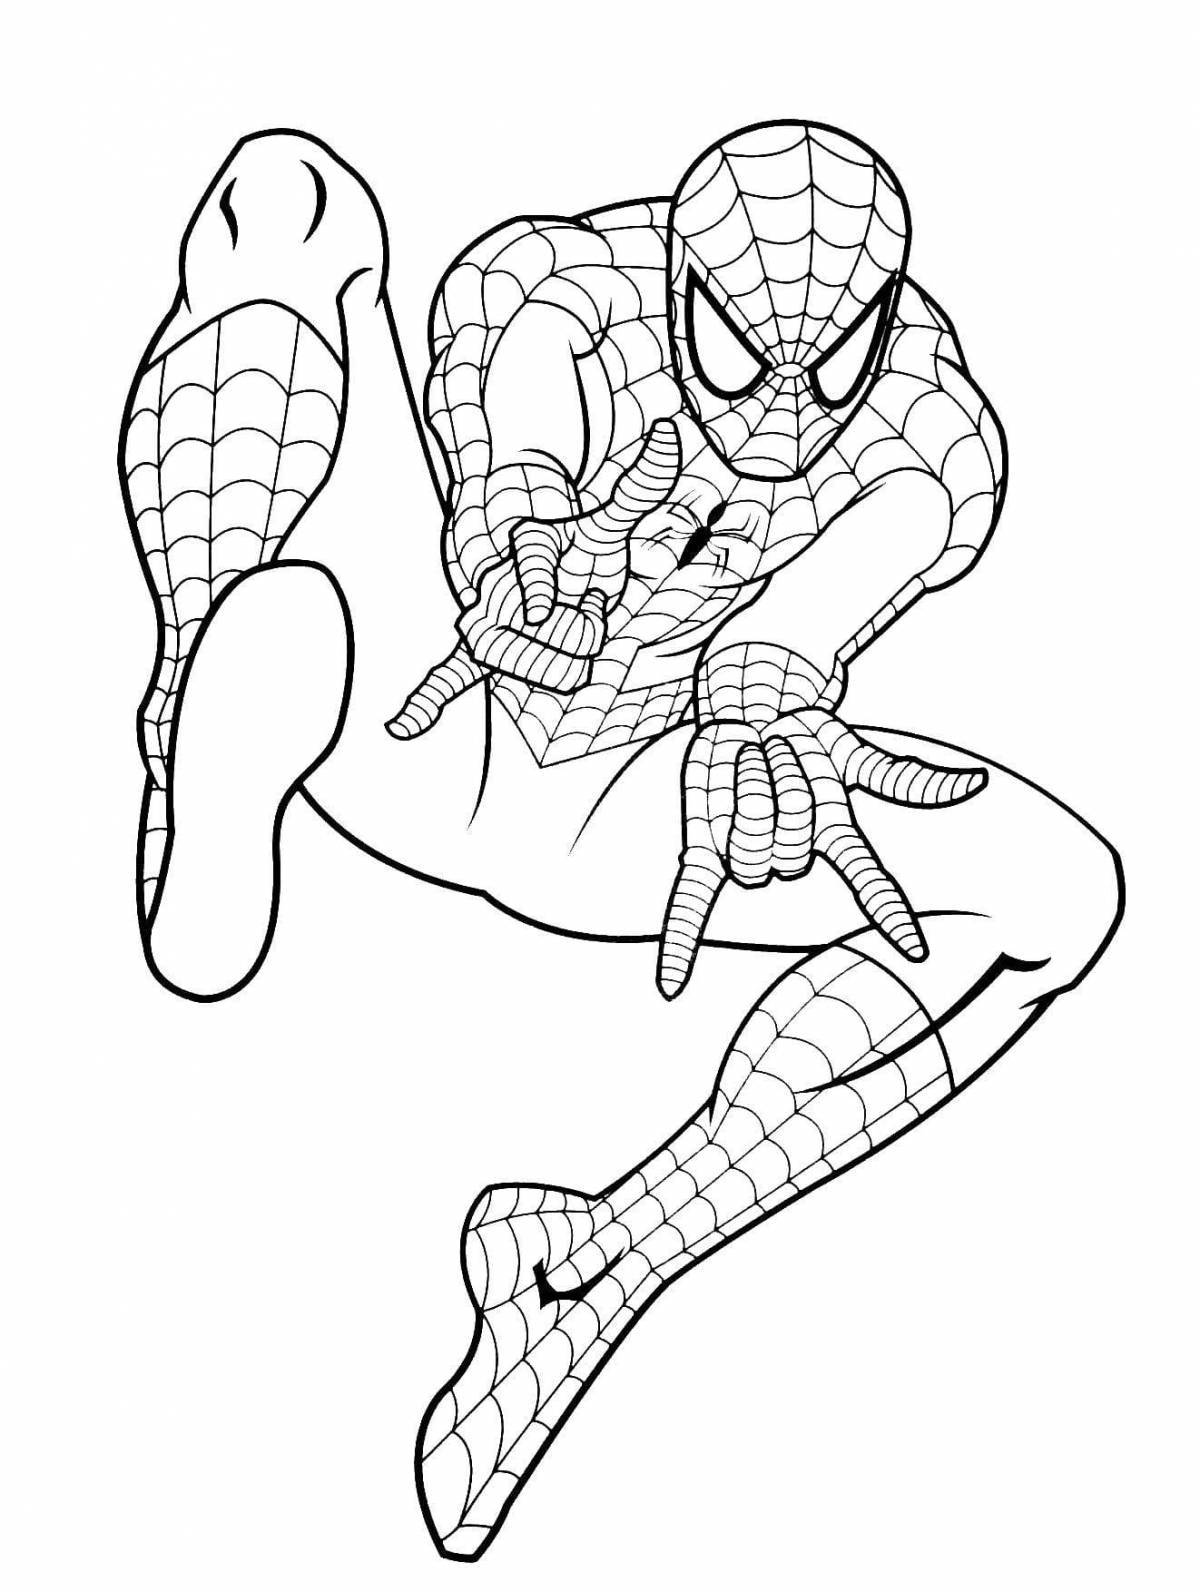 Spider-man shining coloring book